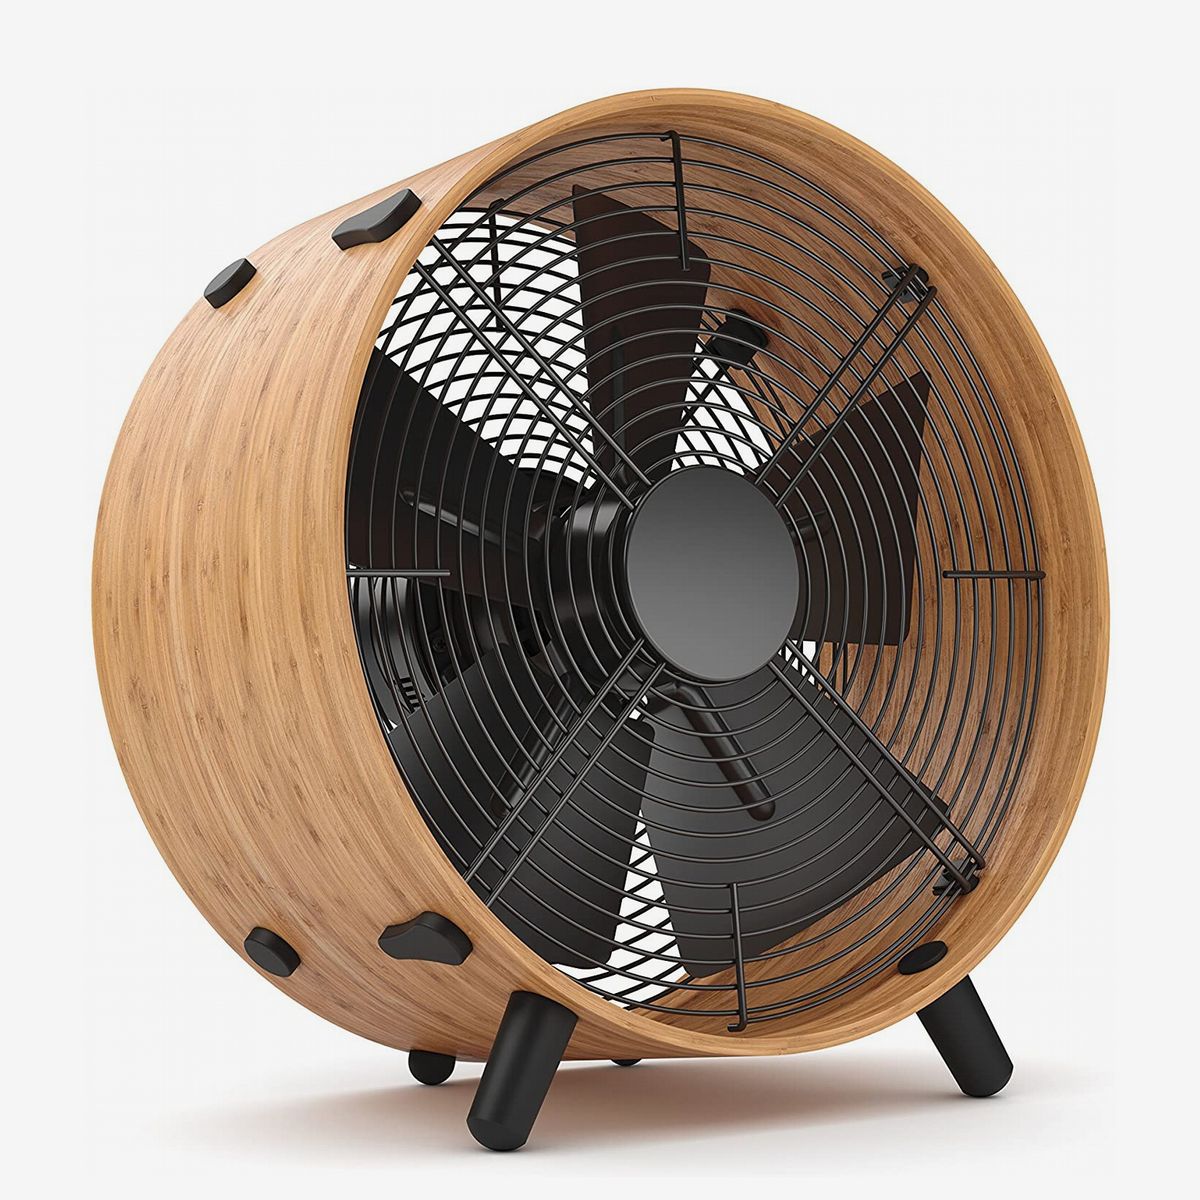 Round black fan with wooden frame. 